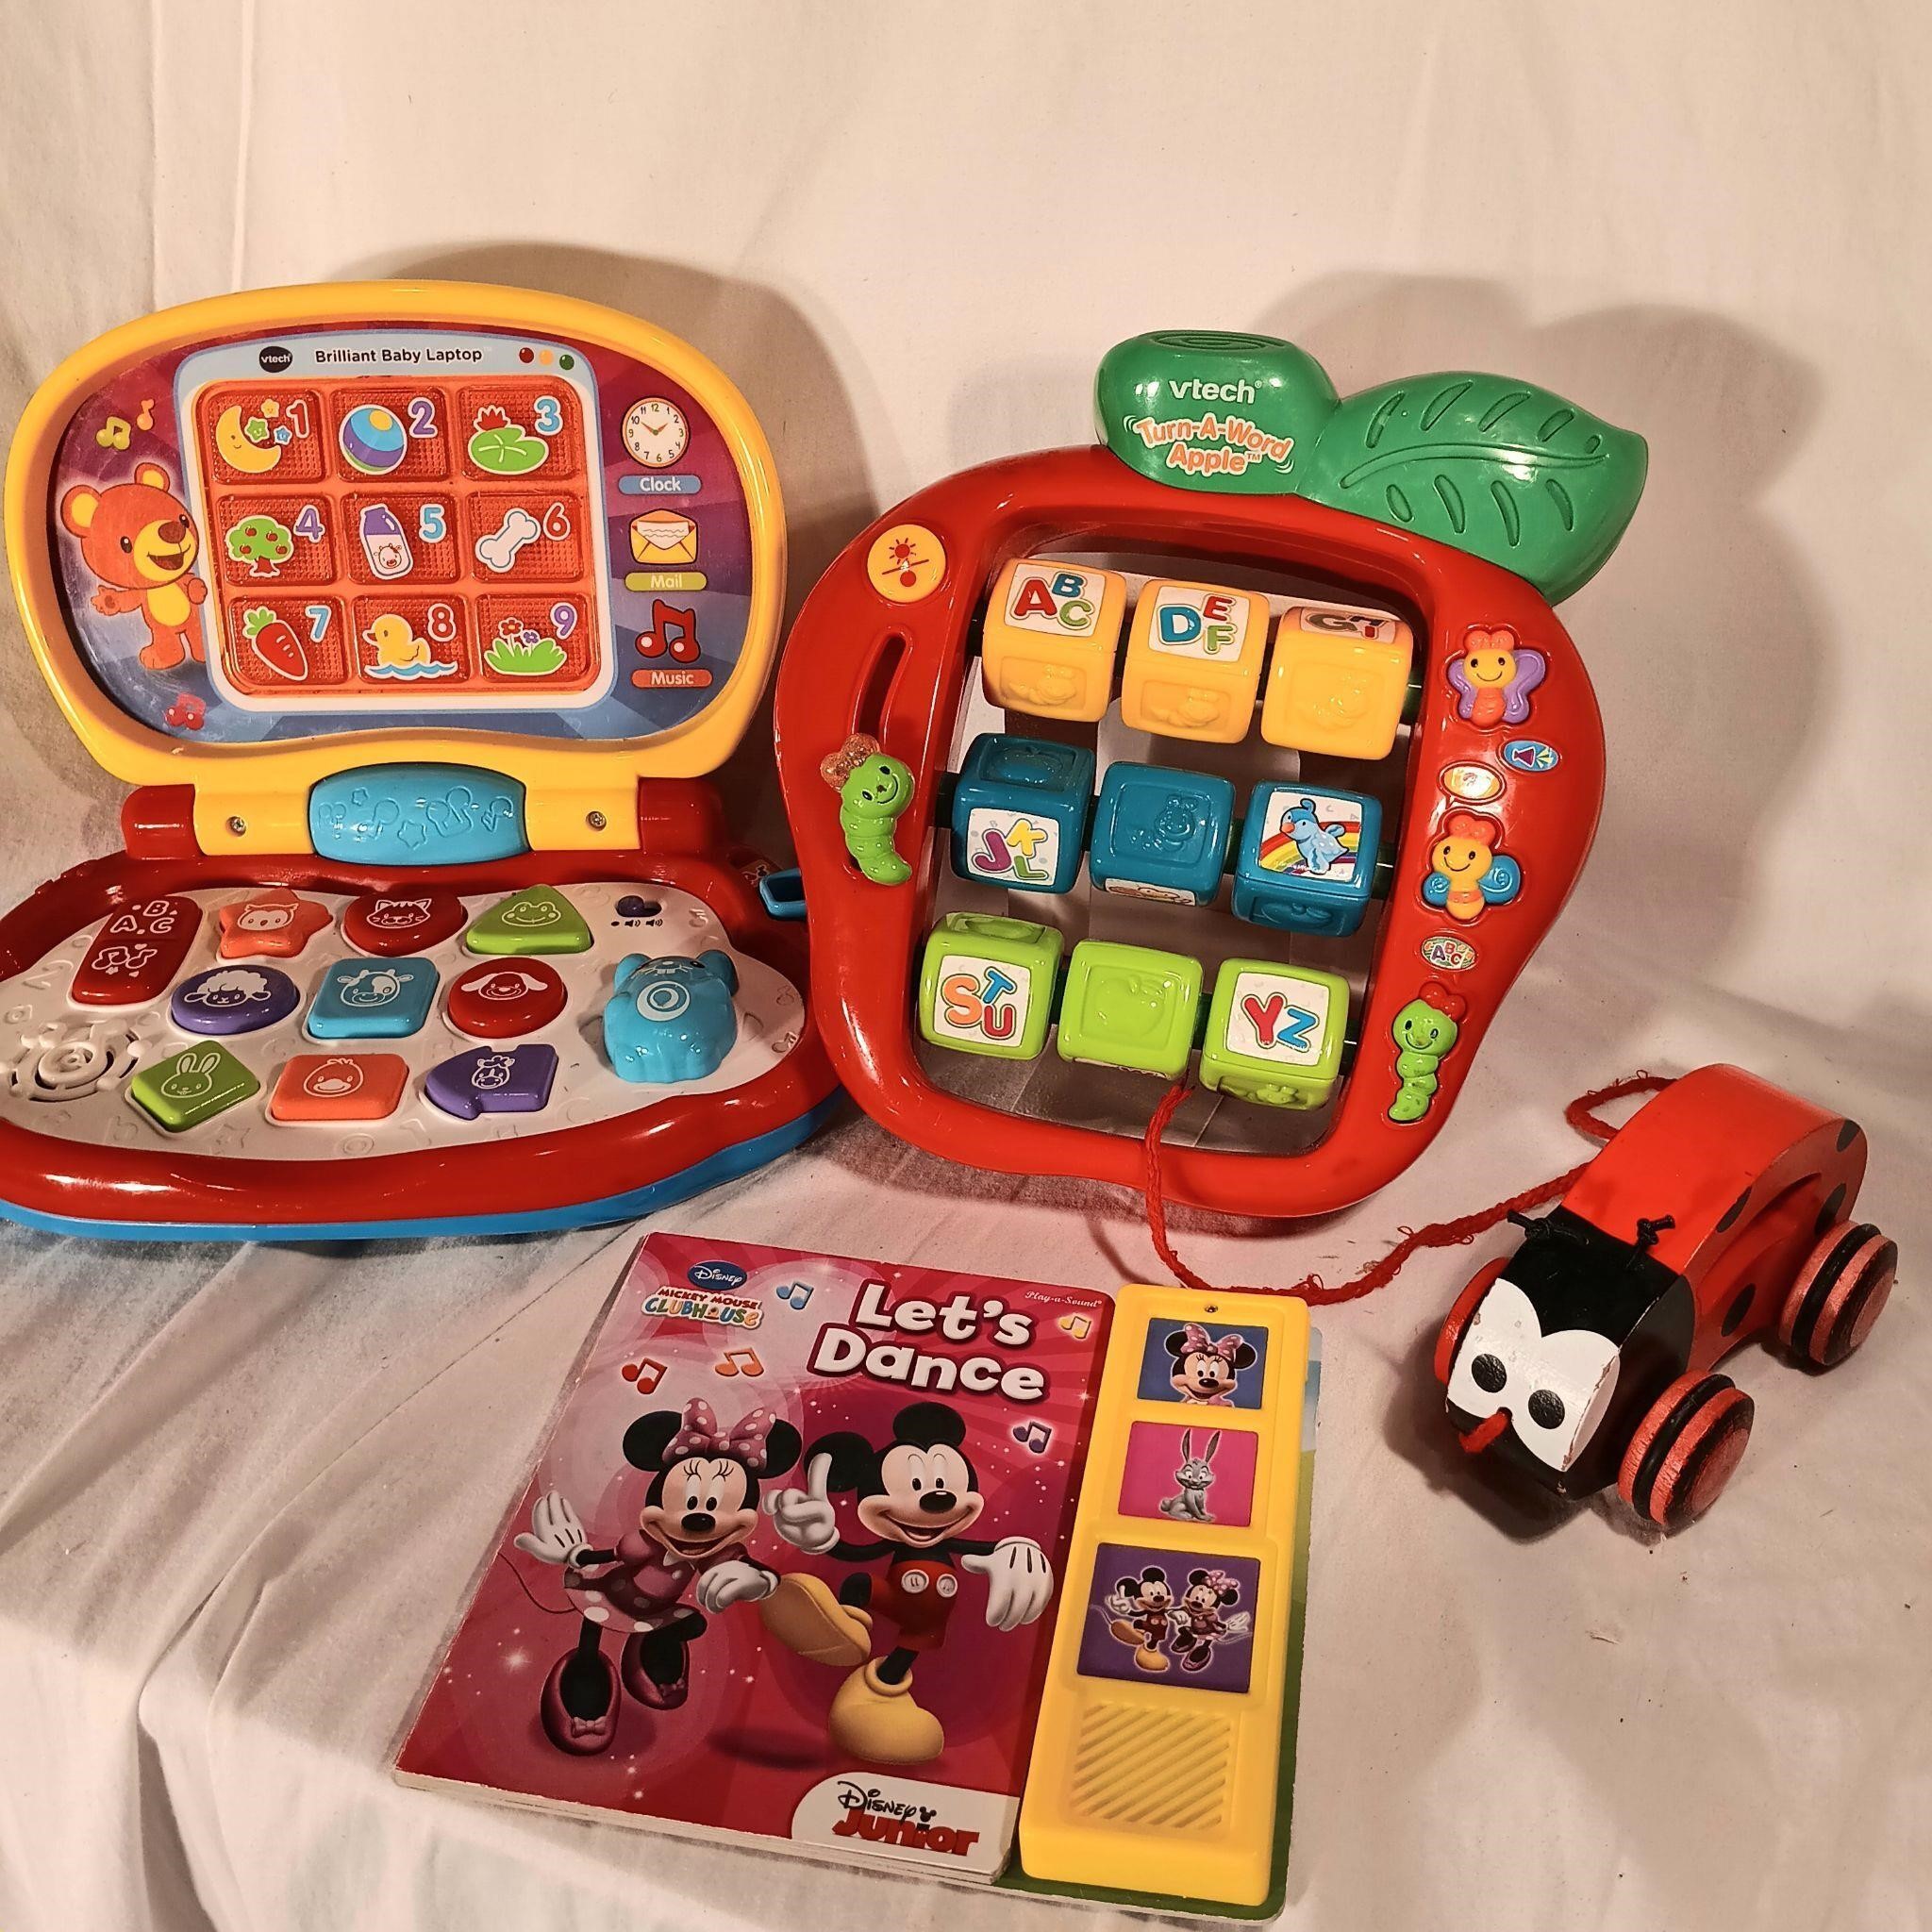 Assortment of Childrens Toys